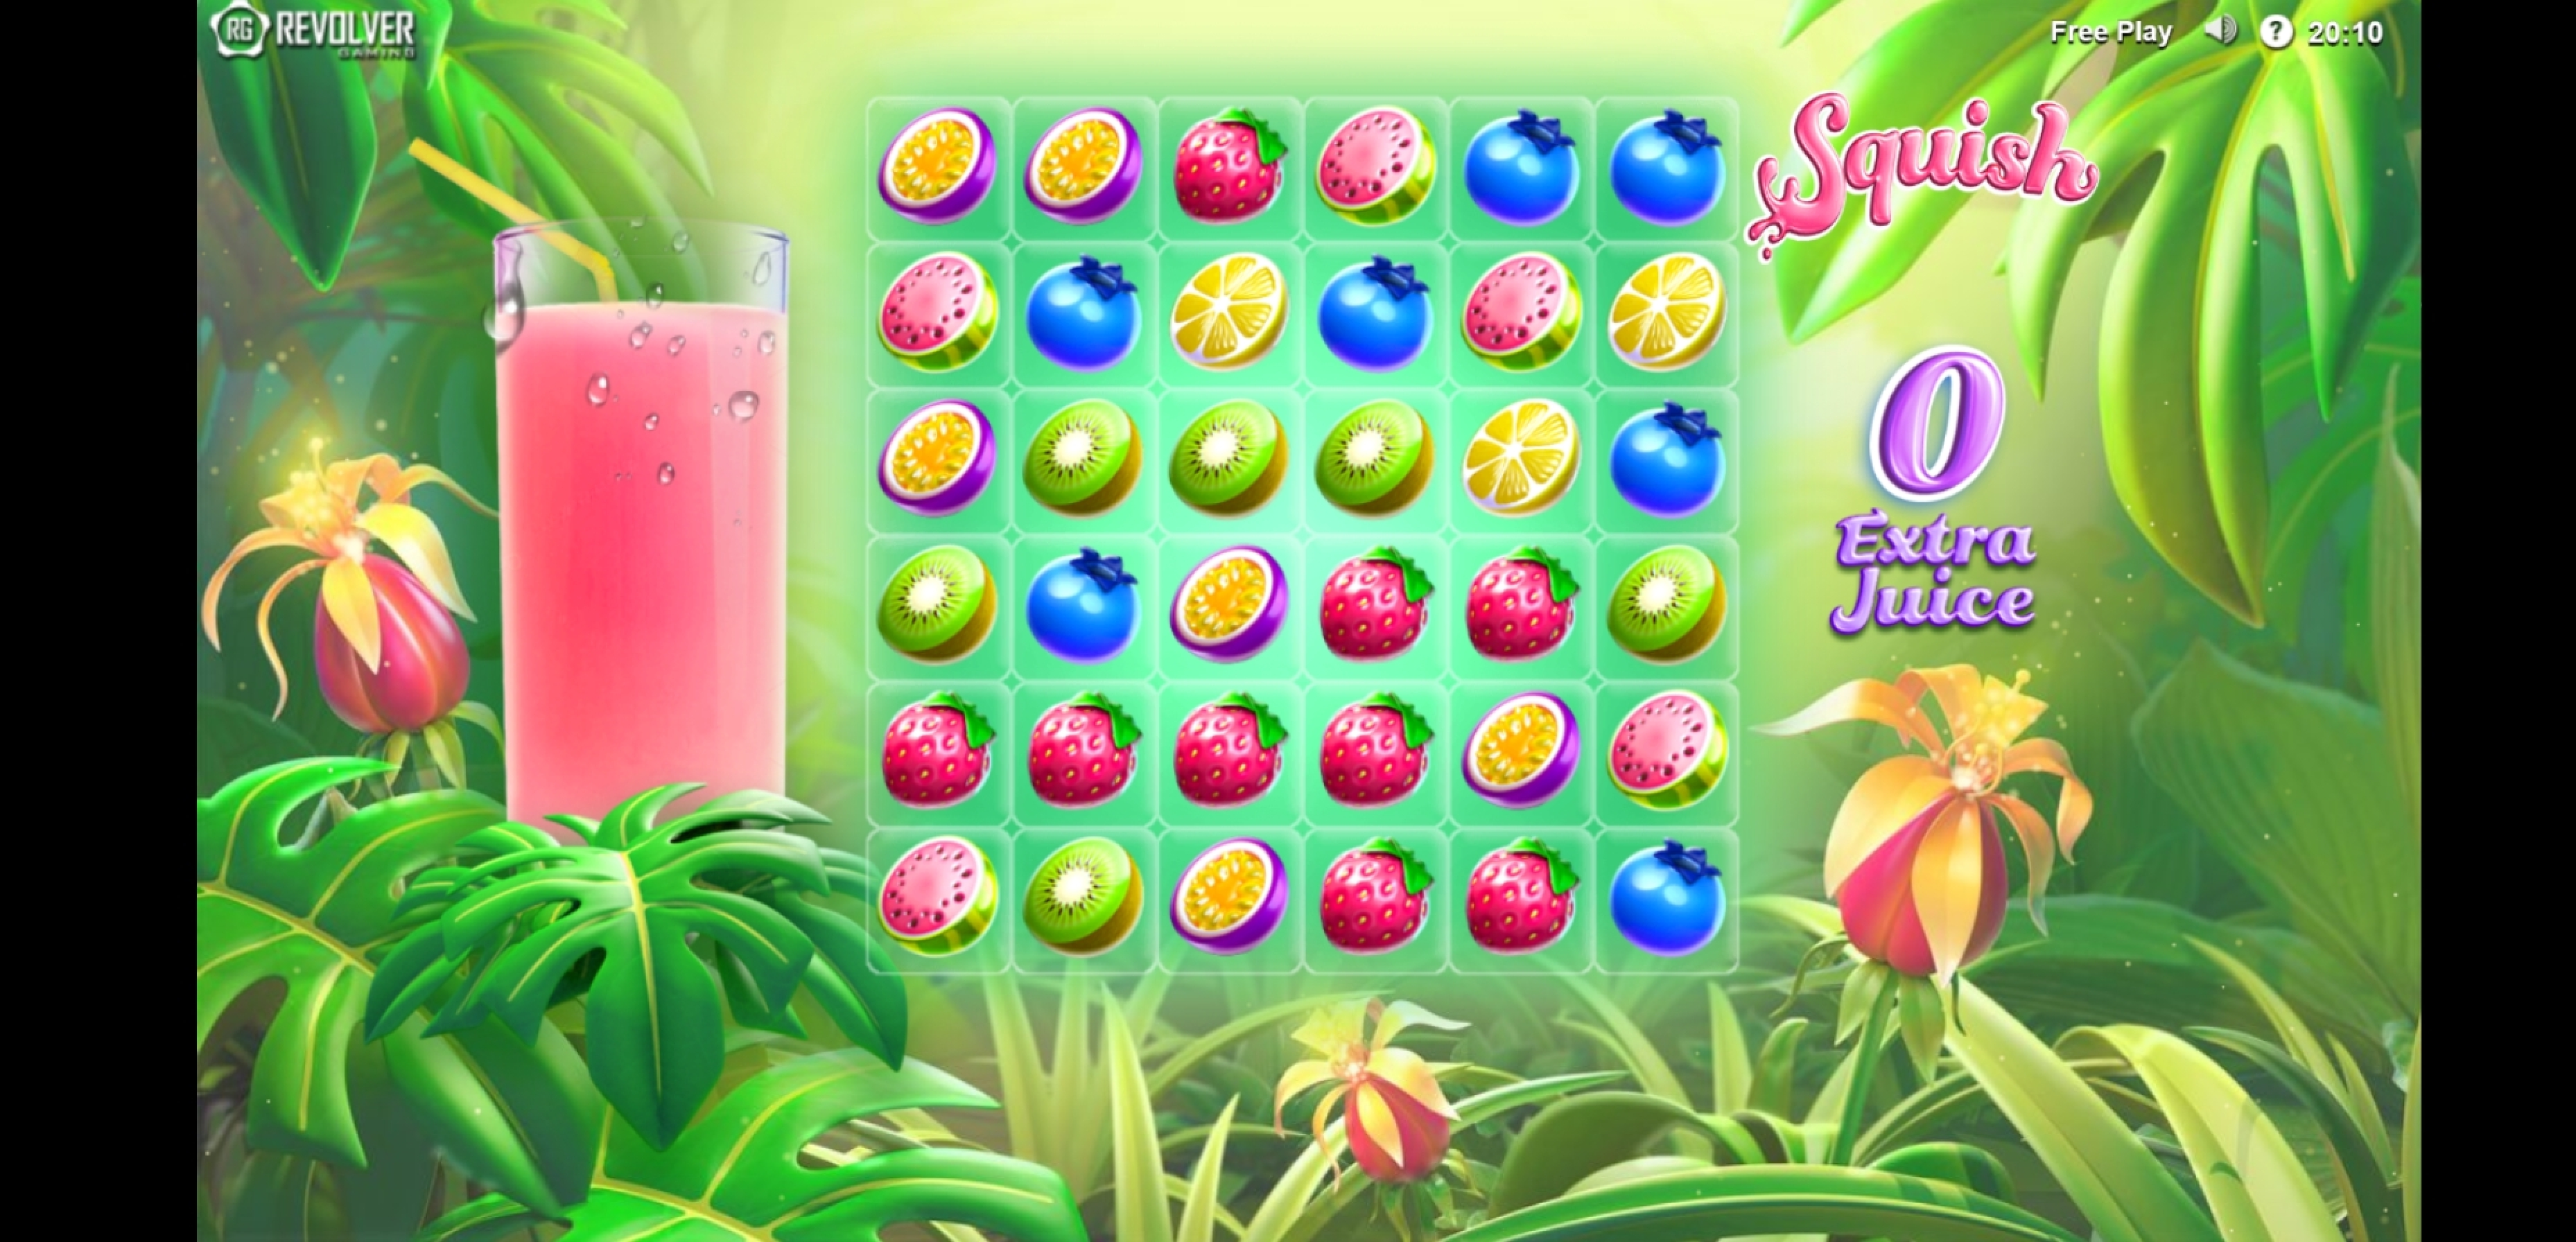 Reels in Squish Slot Game by Revolver Gaming